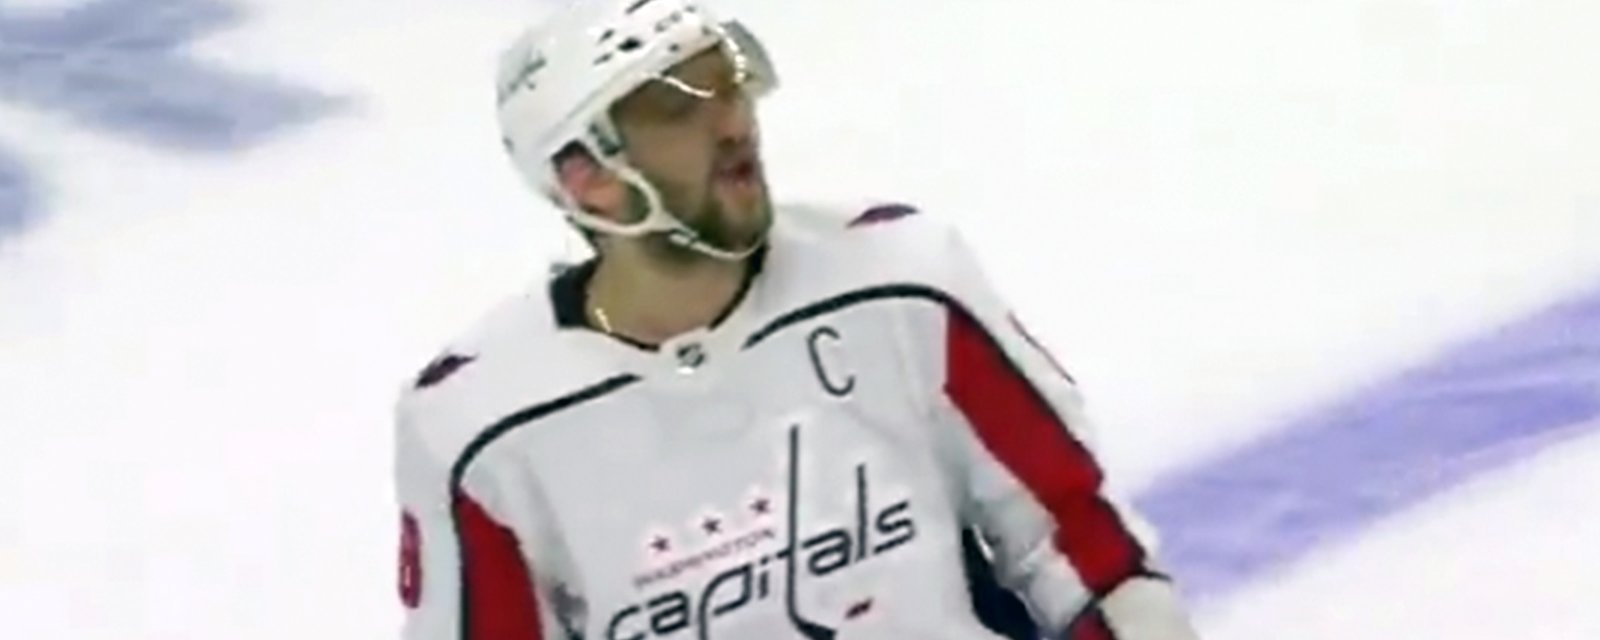 Ovechkin goes after the refs, gets tossed from Game 6